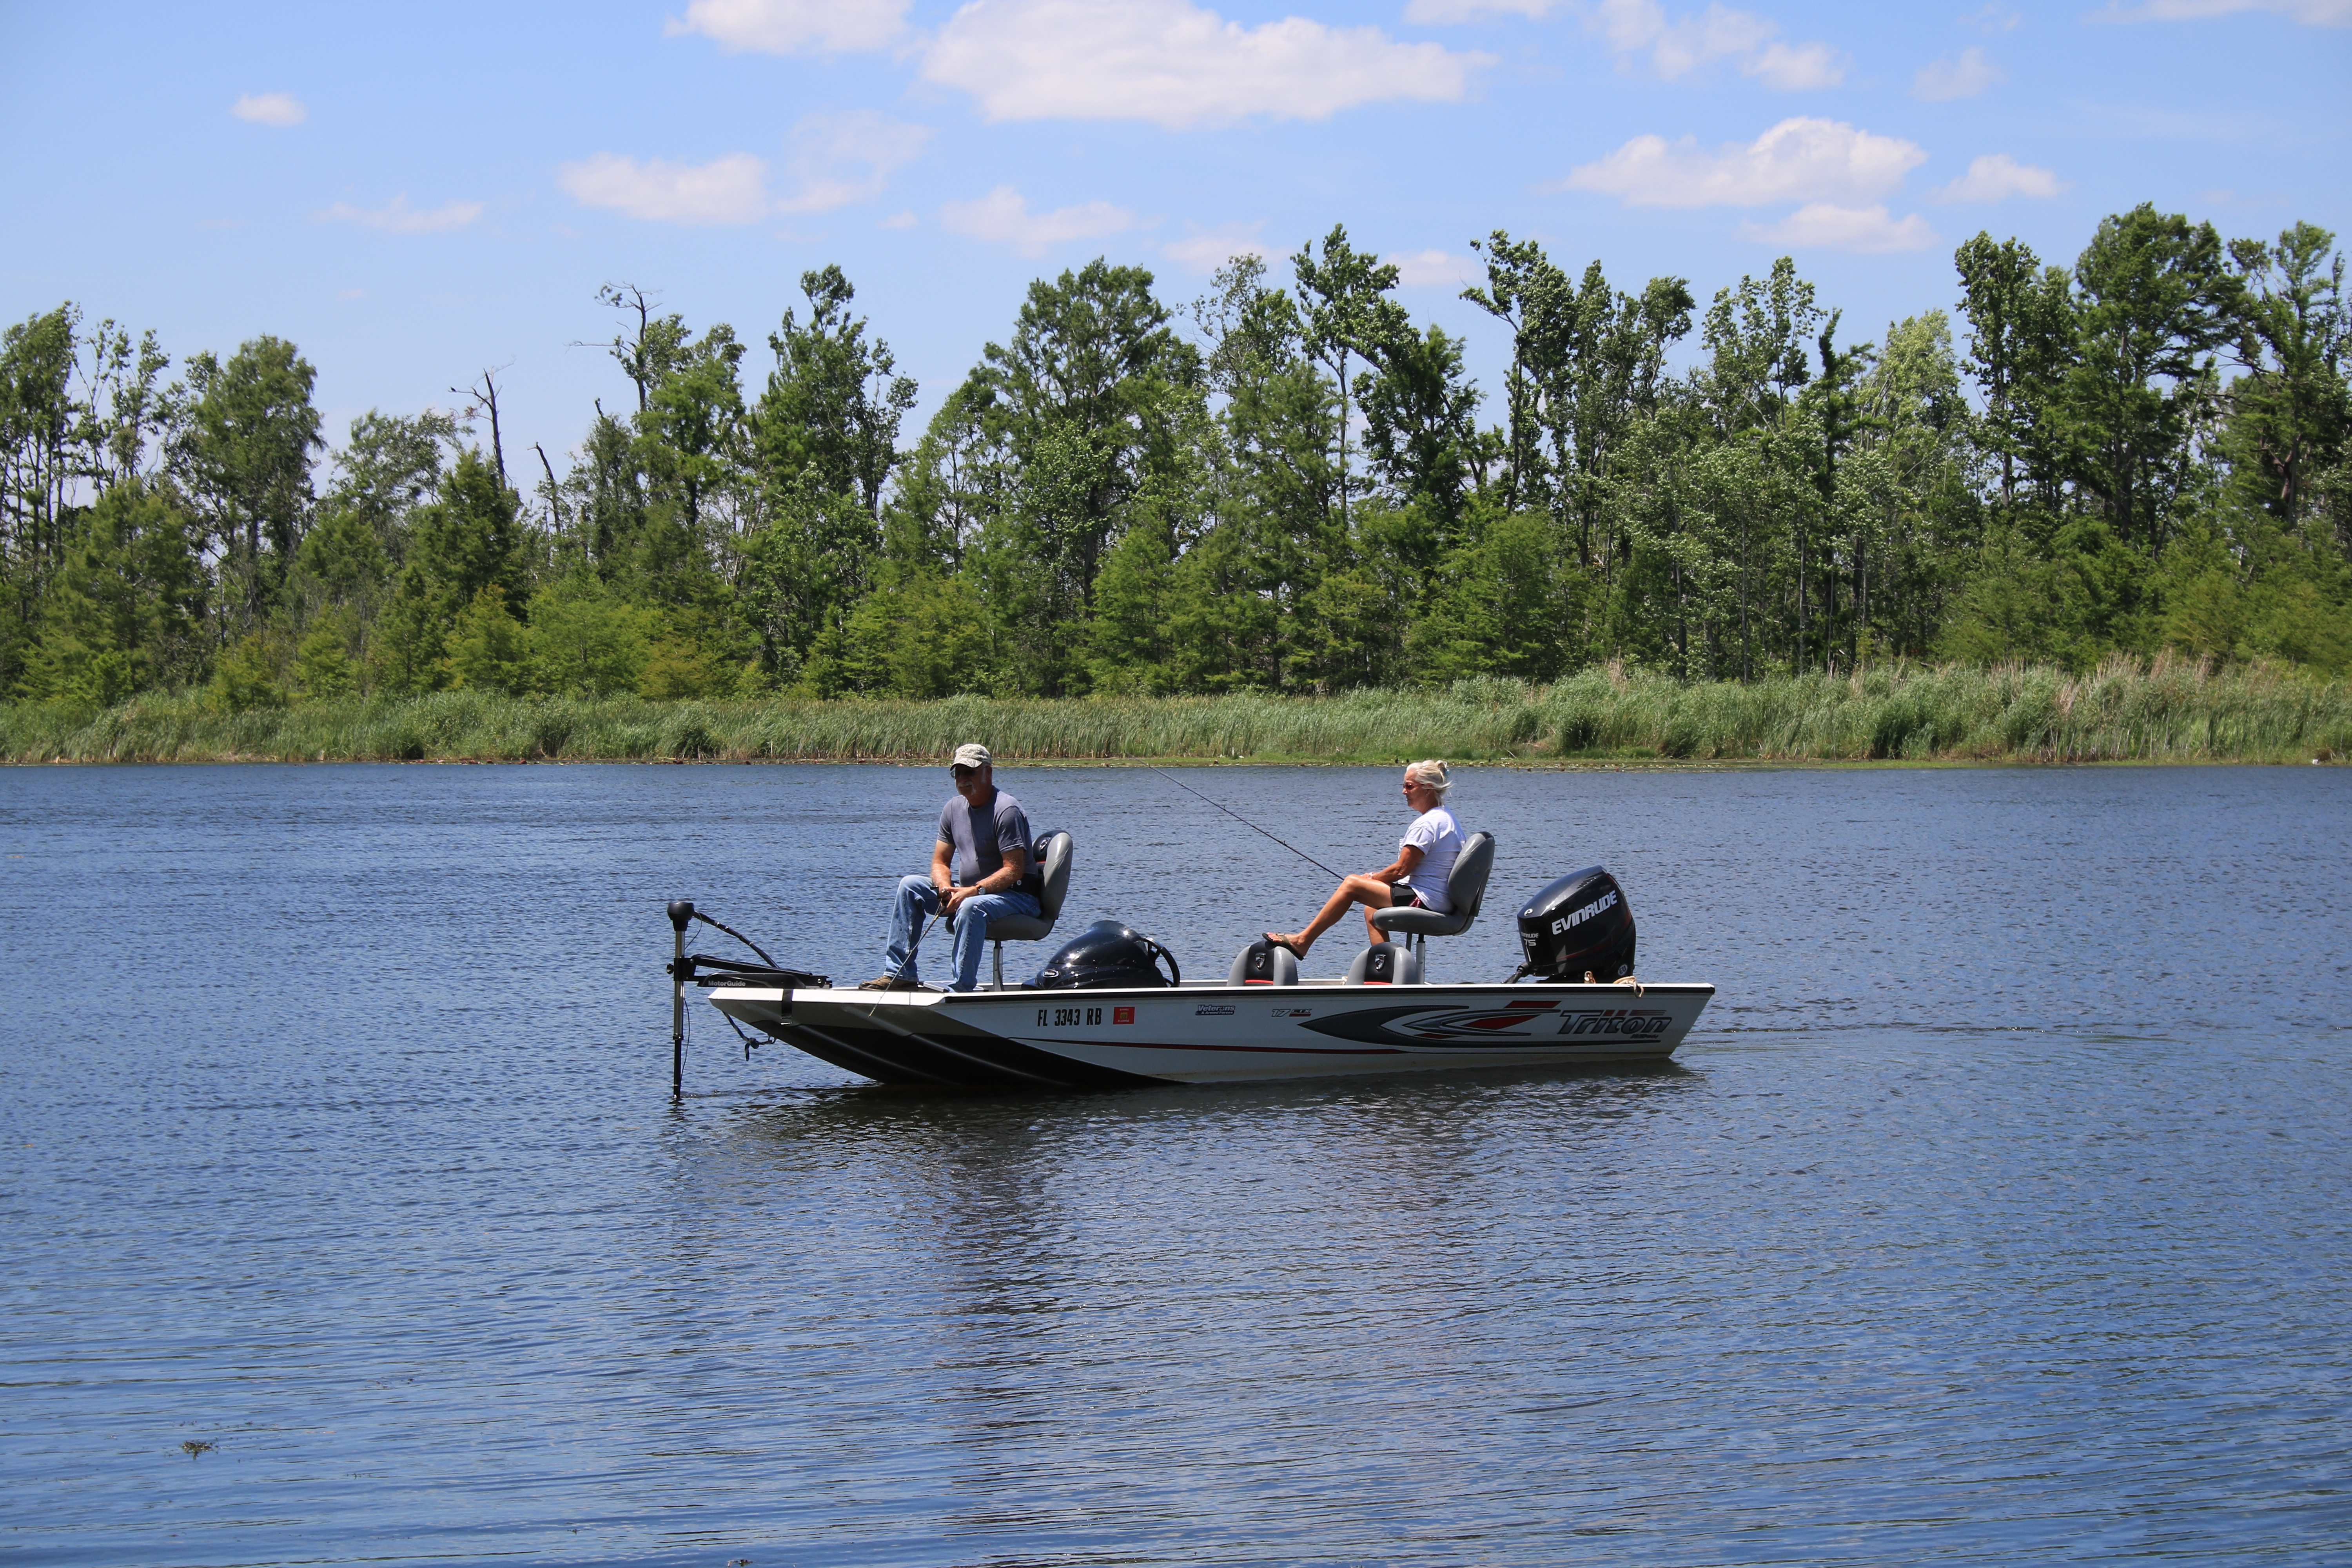 A view of a couple fishing in the lake from their boat.